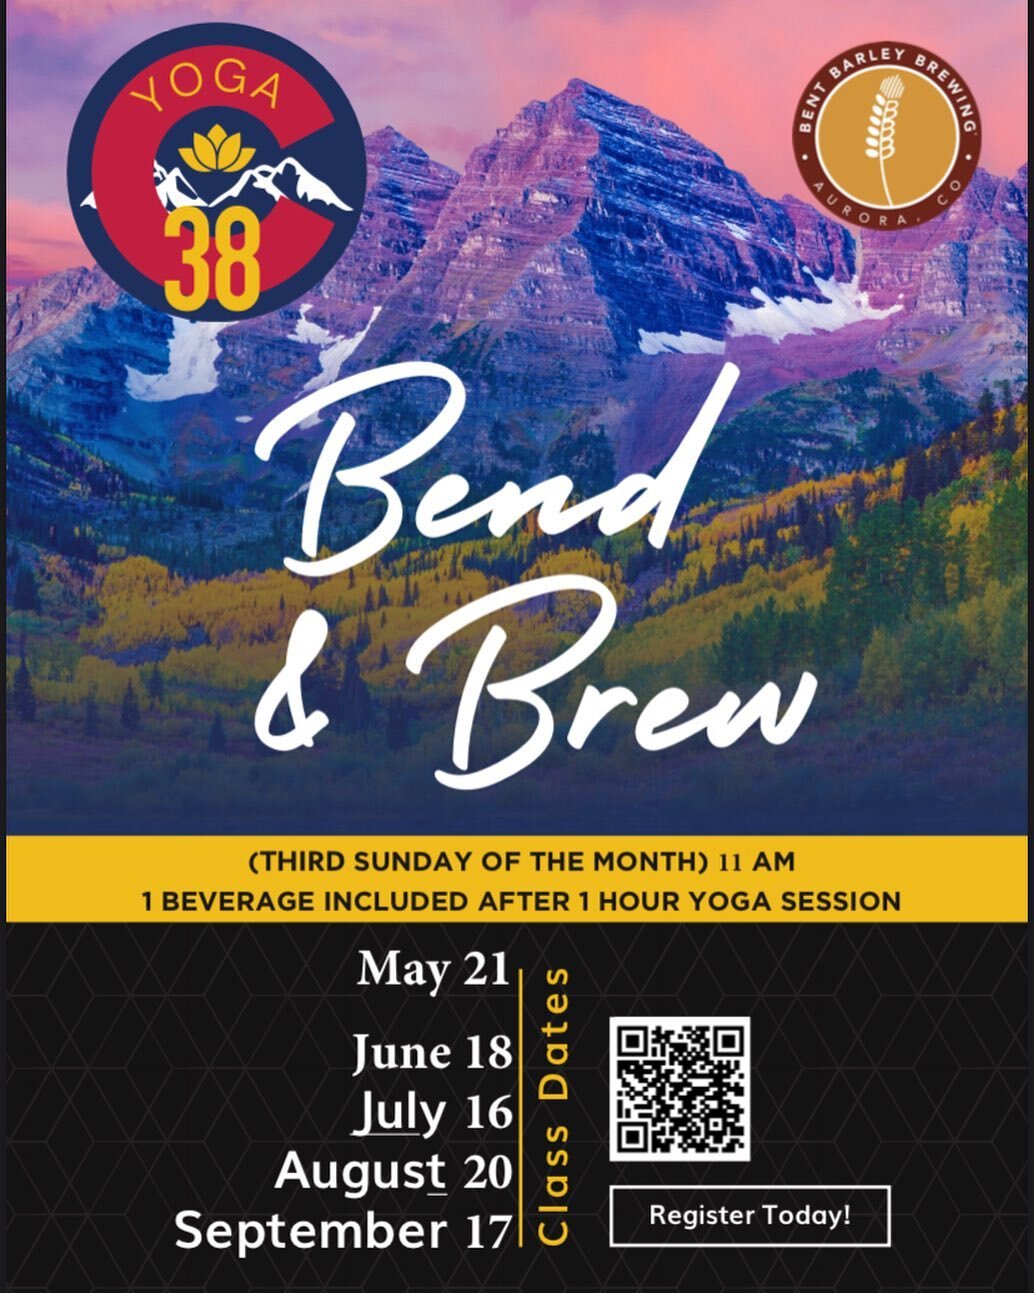 Summer series at @bentbarleybrewing starts tomorrow!! Have you signed up yet?? Don&rsquo;t miss the fun ☀️🧘🏽&zwj;♀️🧘🏻&zwj;♀️❤️